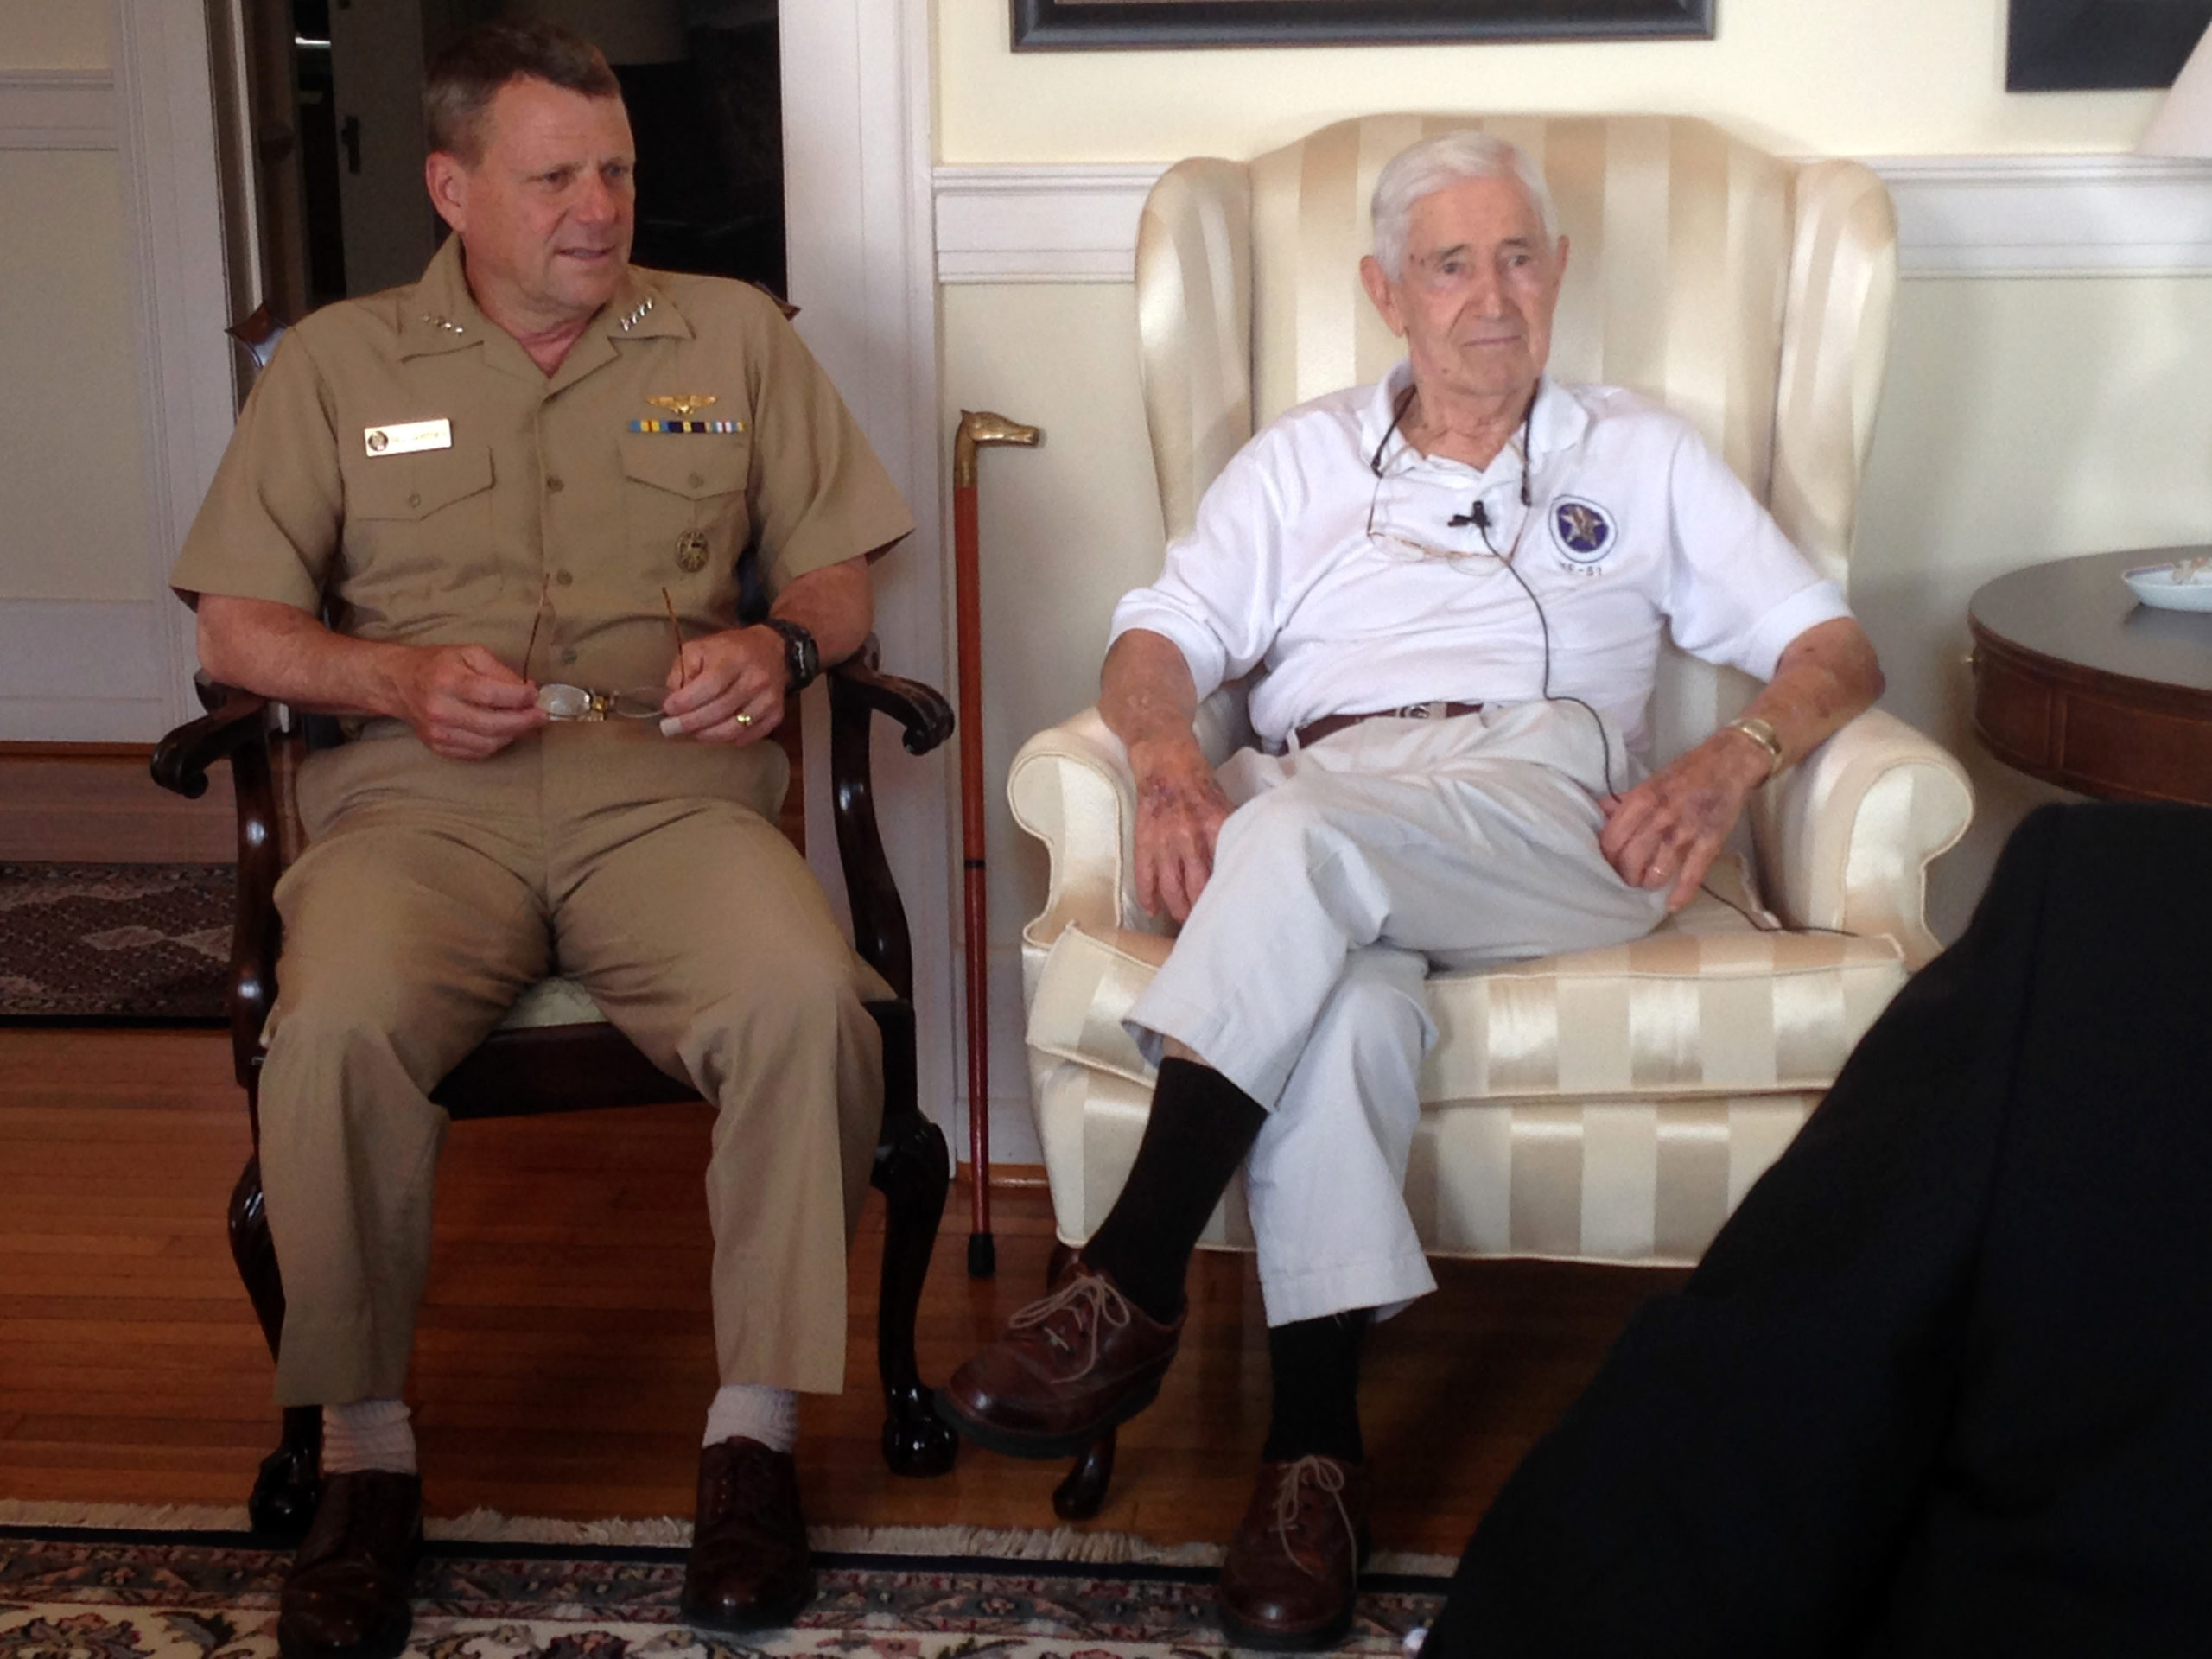 Admiral Willam Gortney and Captain William Gortney, Provided by Captain Jane Campbell, US Navy Fleet Forces, Norfolk VA on June 23, 2014